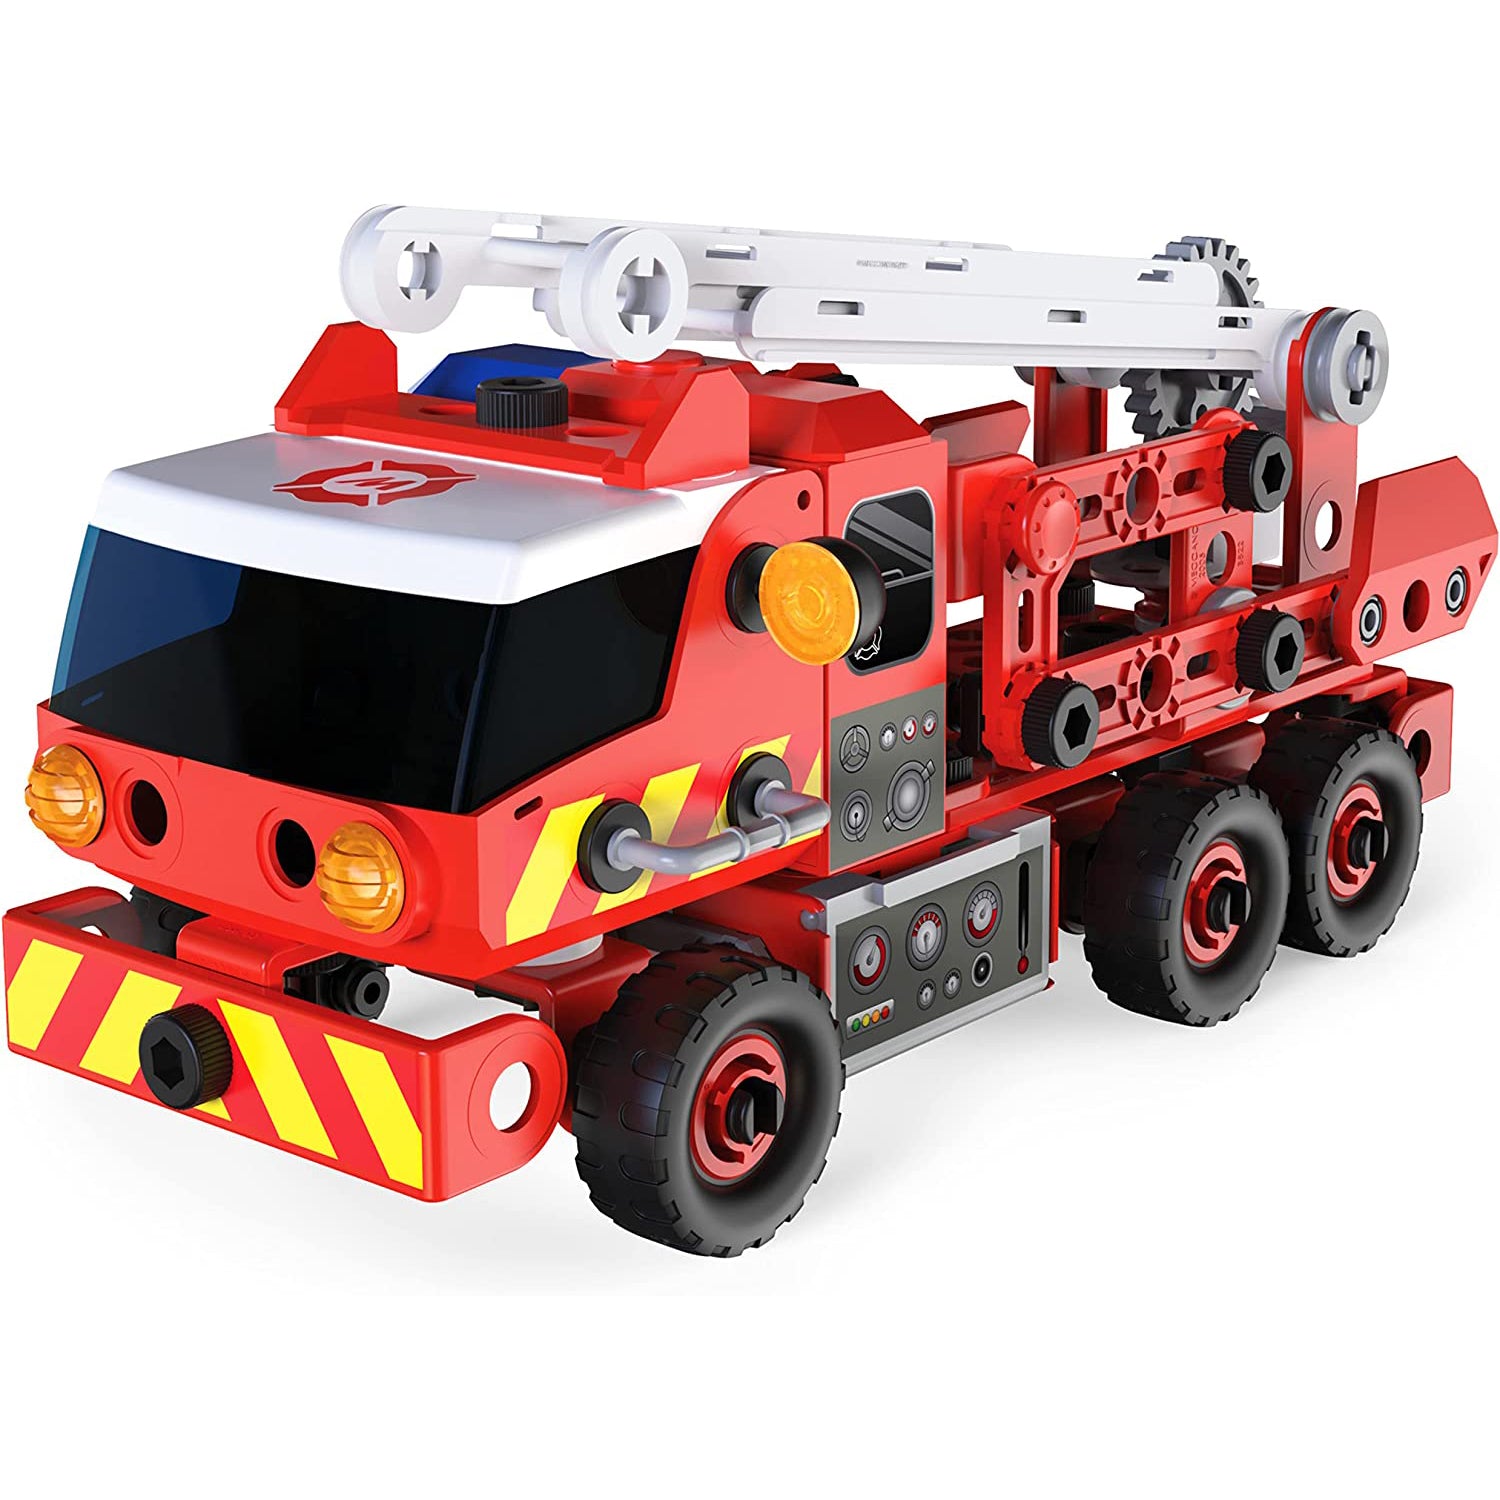 Meccano Junior - Rescue Fire Truck with Lights and Sounds